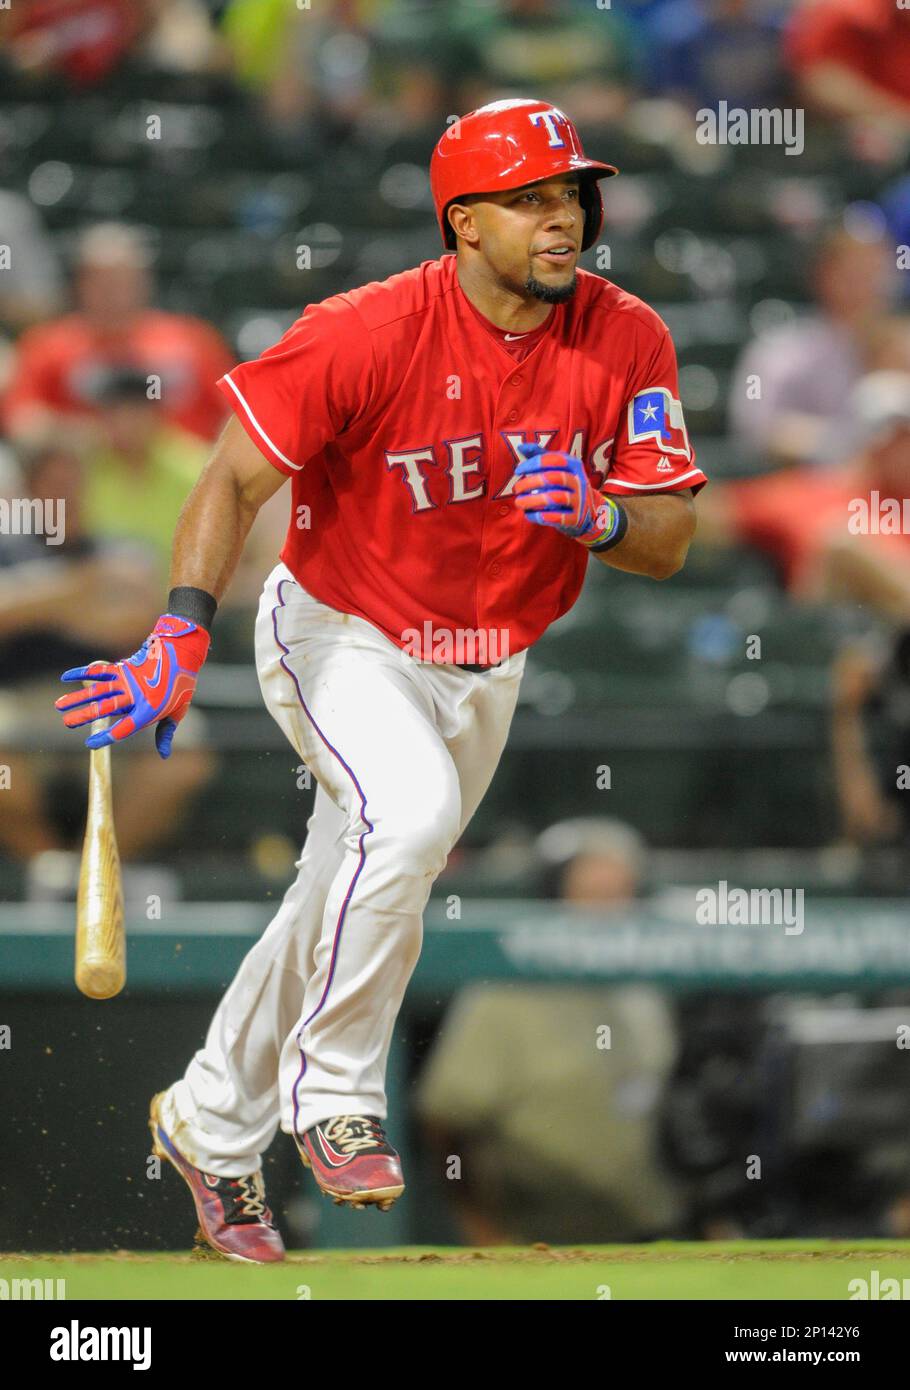 July 27, 2016: Texas Rangers shortstop Elvis Andrus #1 during an